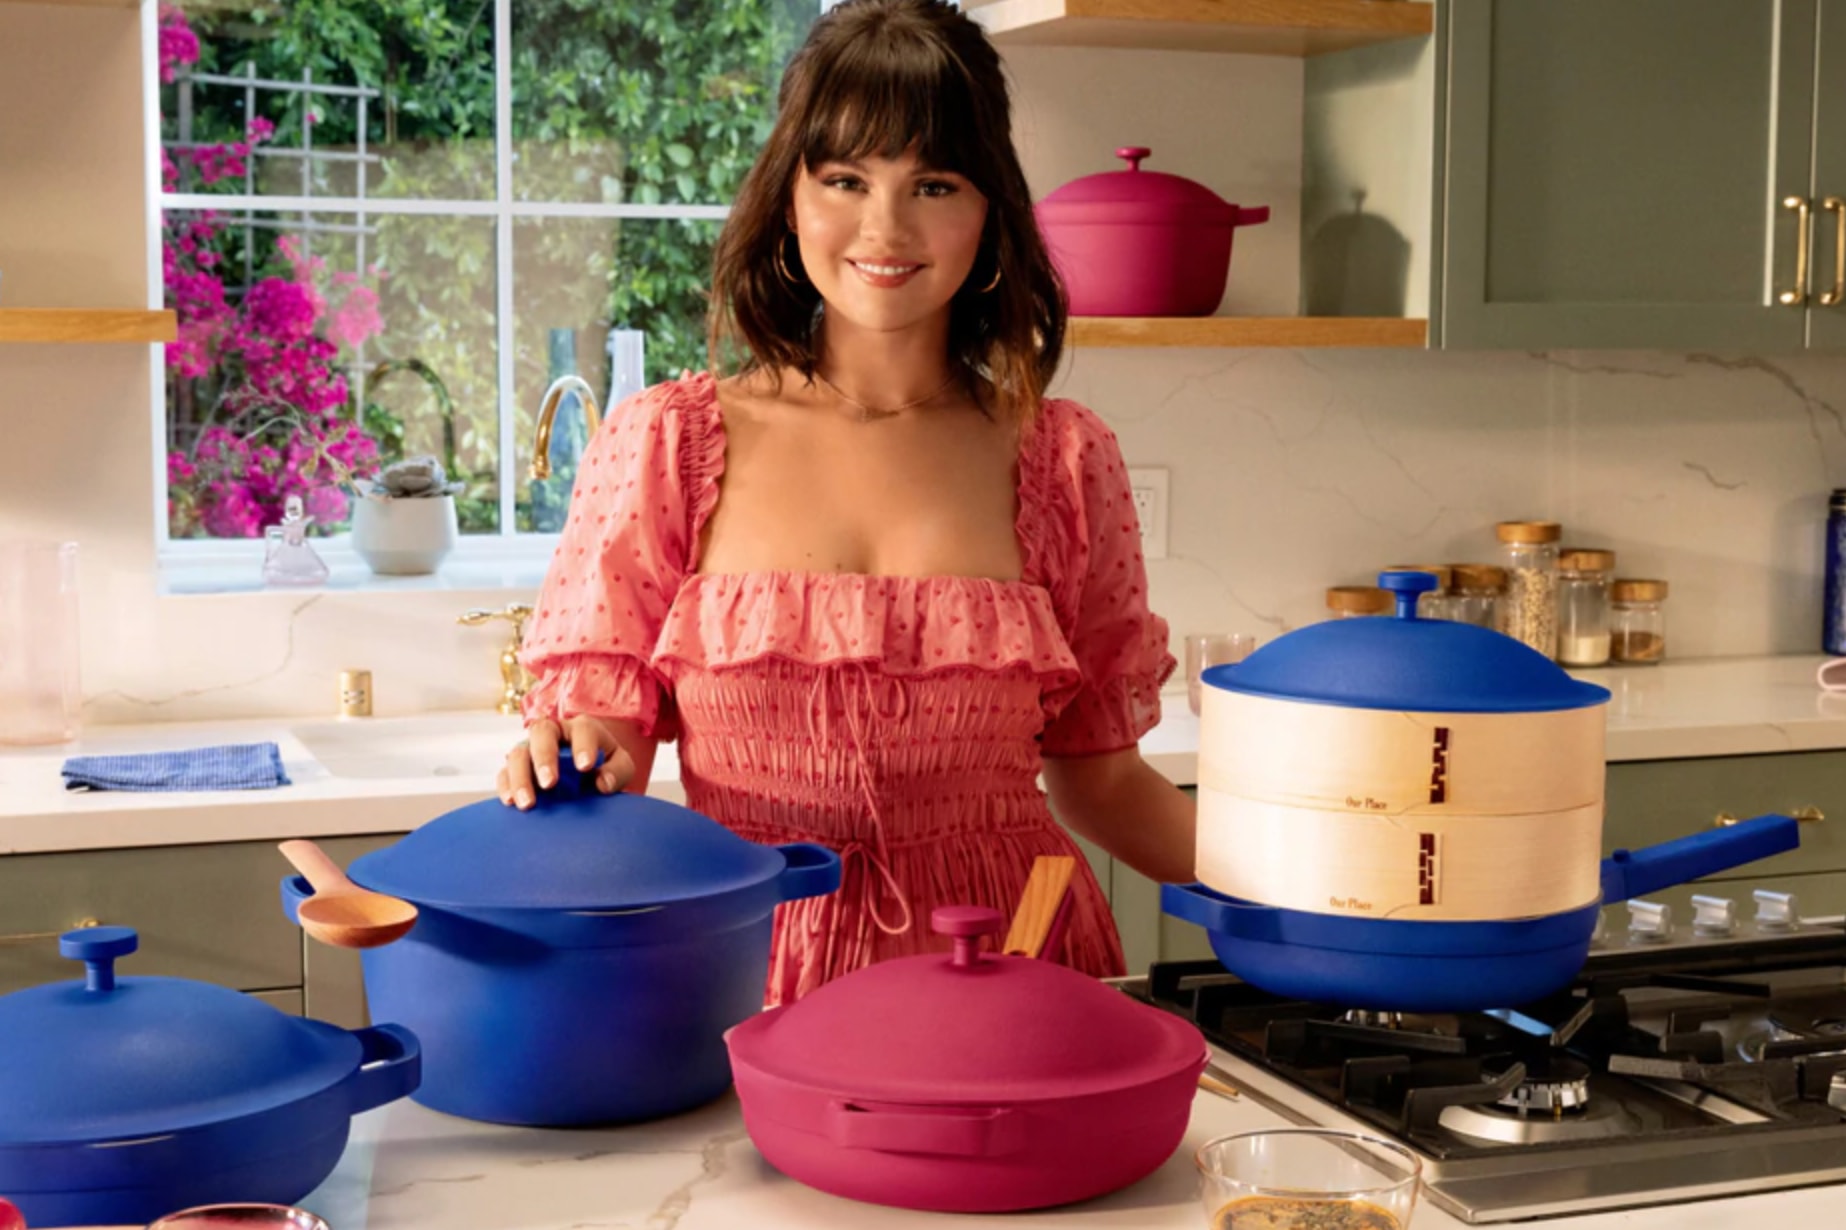 Selena Gomez Just Launched Cookware With an Internet-Famous Brand